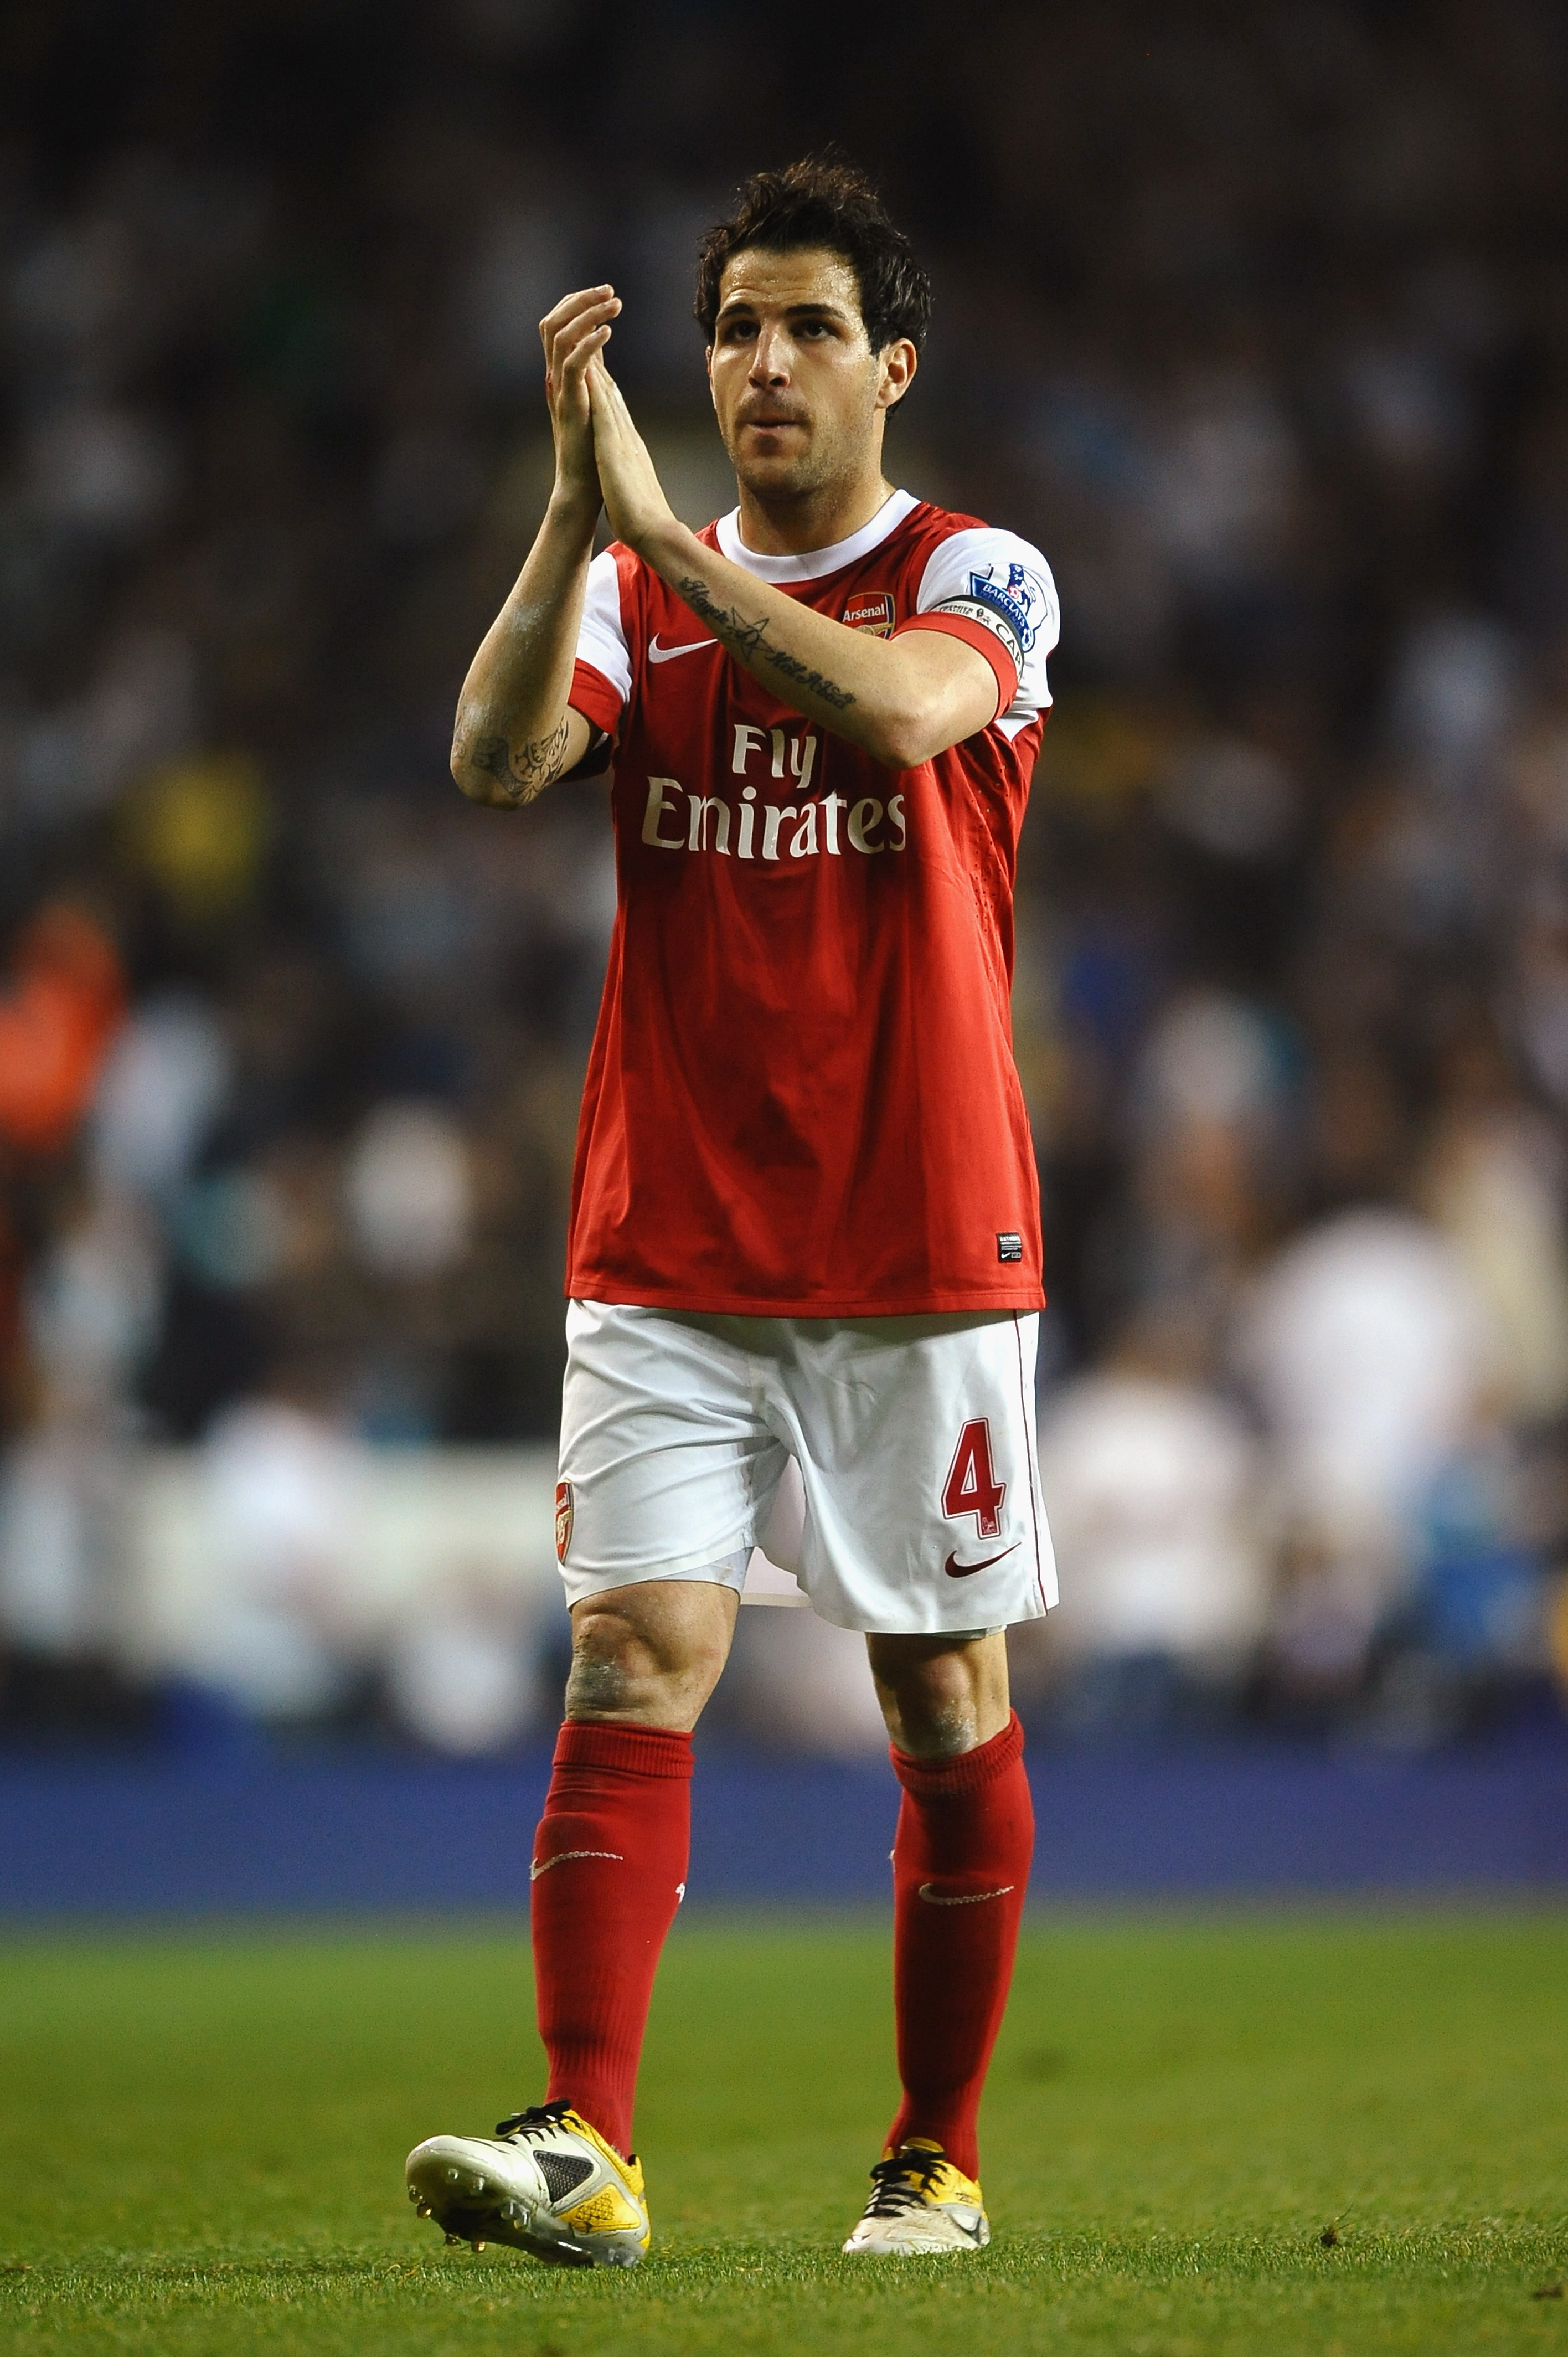 LONDON, ENGLAND - APRIL 20:  Cesc Fabregas of Arsenal applauds the fans during the Barclays Premier League match between Tottenham Hotspur and Arsenal at White Hart Lane on April 20, 2011 in London, England.  (Photo by Laurence Griffiths/Getty Images)